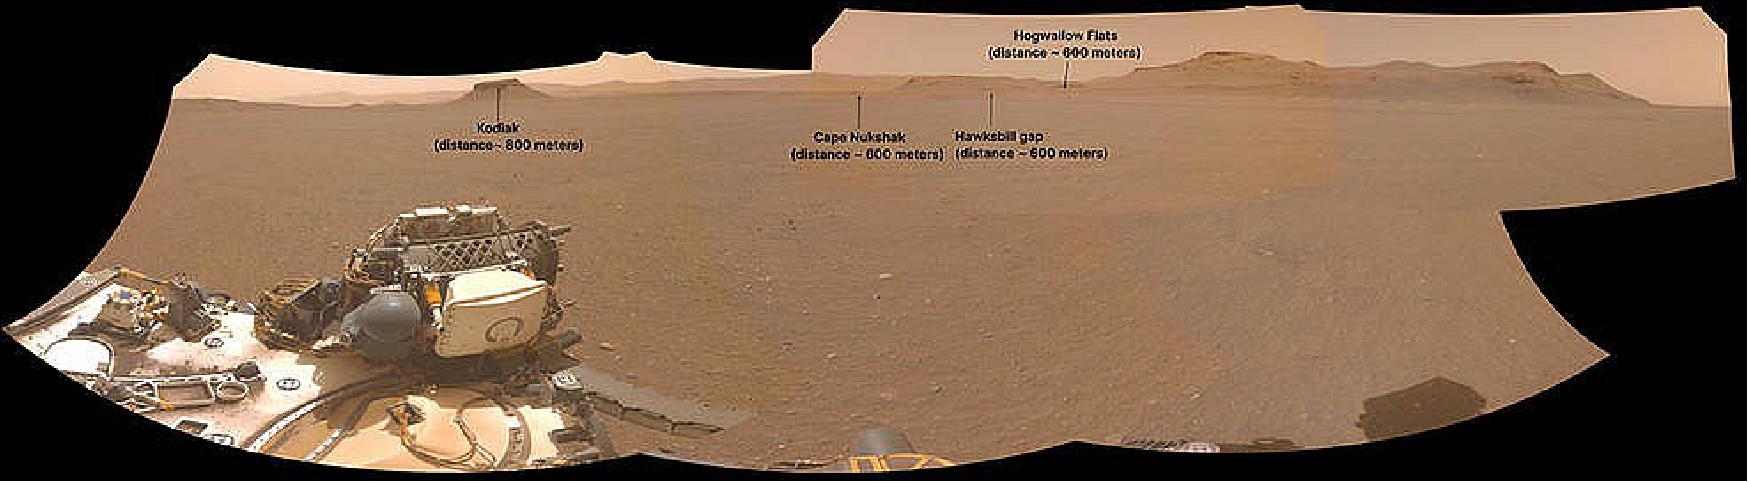 Figure 11: This is an annotated version of the Figure 10 panorama that notes important features in the distance as well as how far away they are (image credit: NASA/JPL-Caltech)